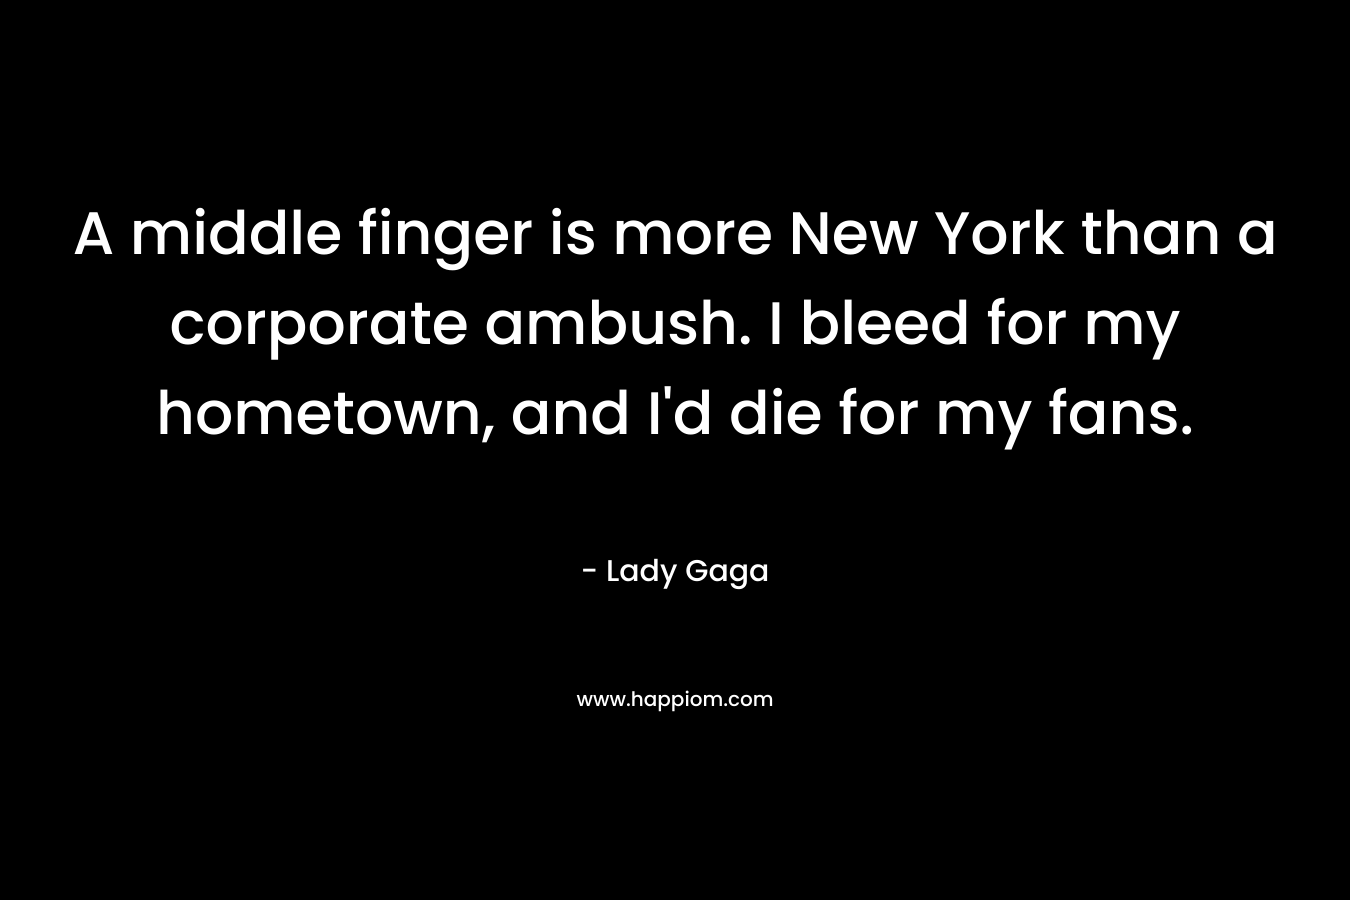 A middle finger is more New York than a corporate ambush. I bleed for my hometown, and I’d die for my fans. – Lady Gaga